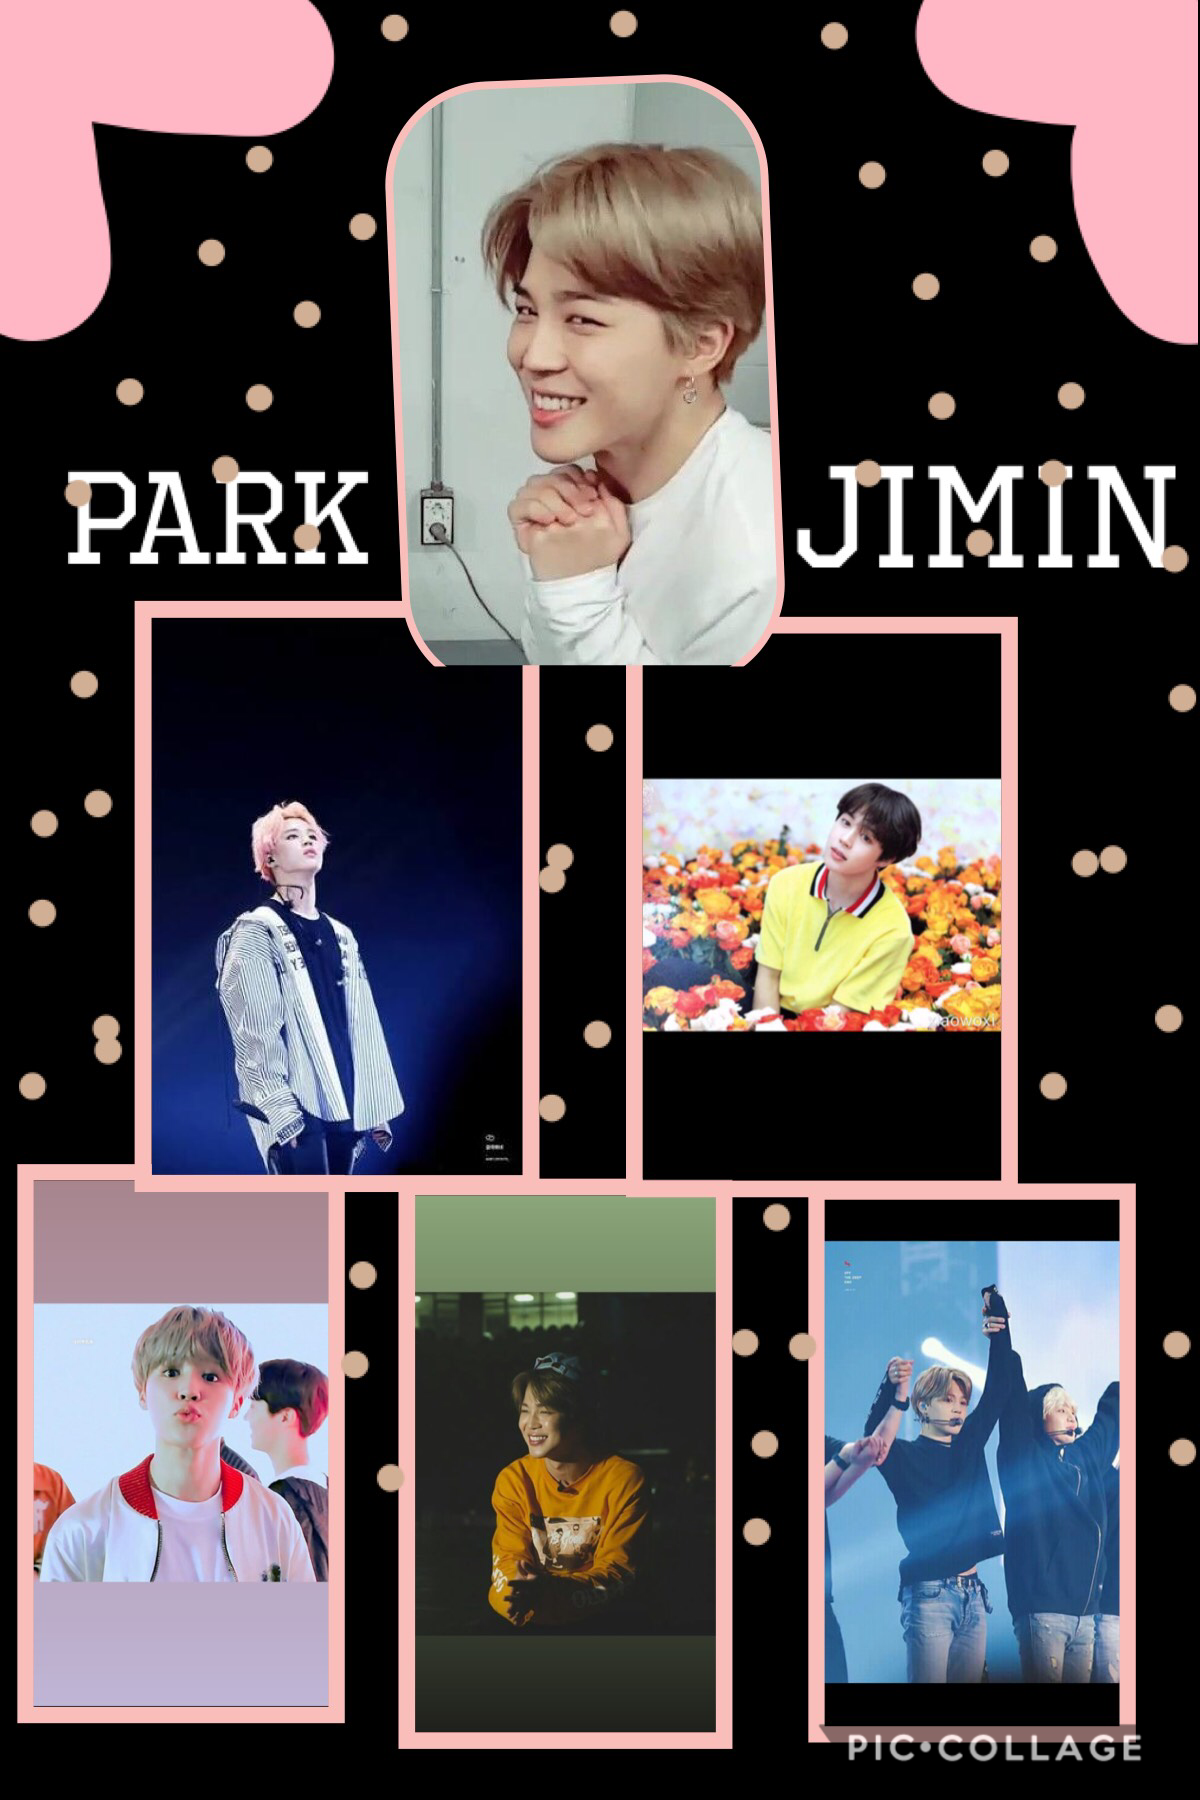 Park Jimin 💕
Bangtans cutie and support and vocalist 